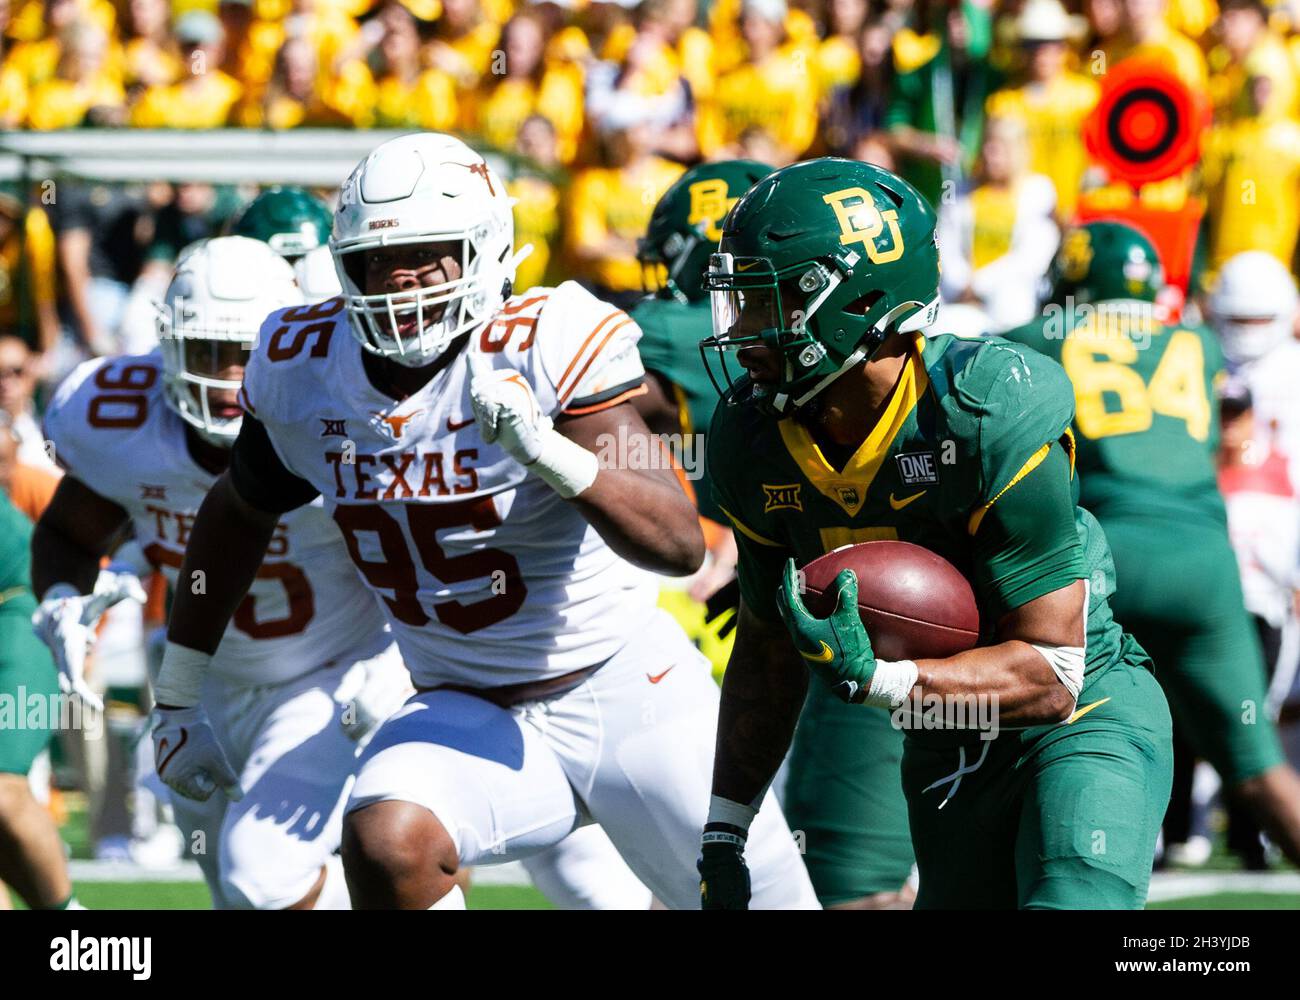 Waco, Texas, USA. 30th Oct, 2021. Texas Longhorns defensive lineman Alfred Collins (95) chases Baylor Bears running back Abram Smith (7) during the 2nd half of the NCAA Football game between the Texas Longhorns and Baylor Bears at McLane Stadium in Waco, Texas. Matthew Lynch/CSM/Alamy Live News Stock Photo